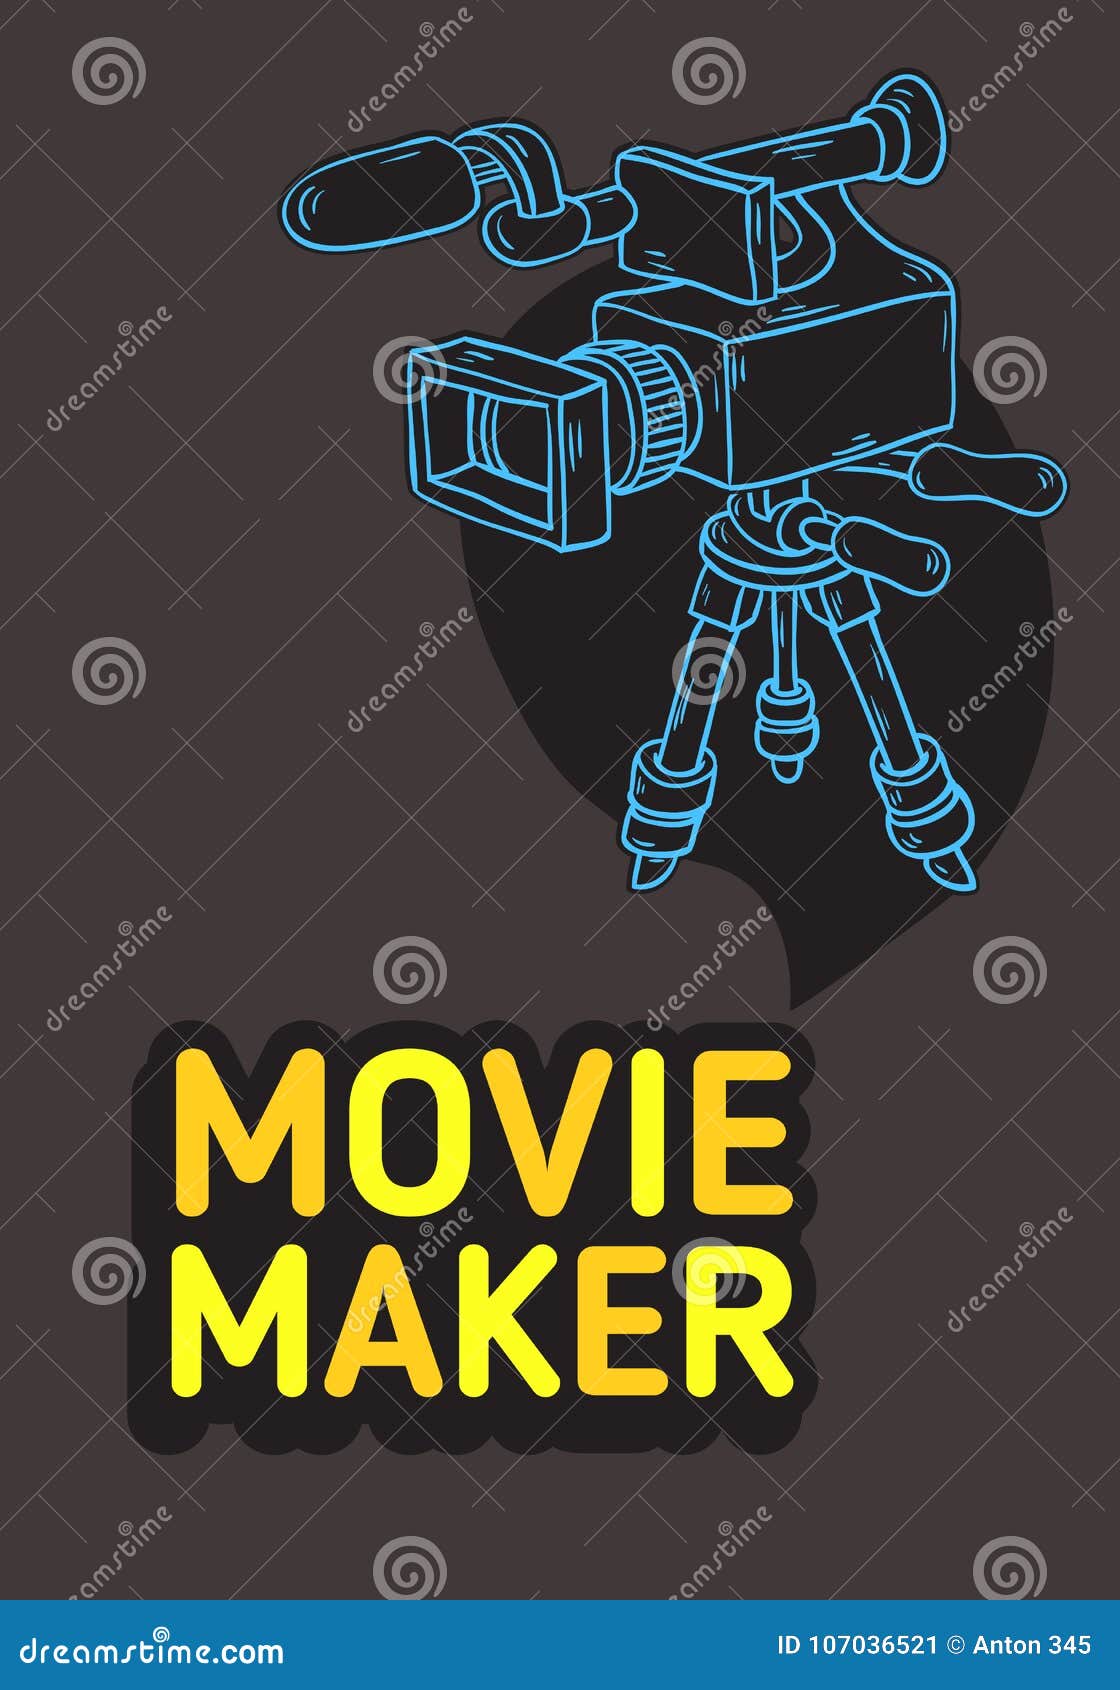 Movie Maker Poster Design With Isolated Video Camera Stock